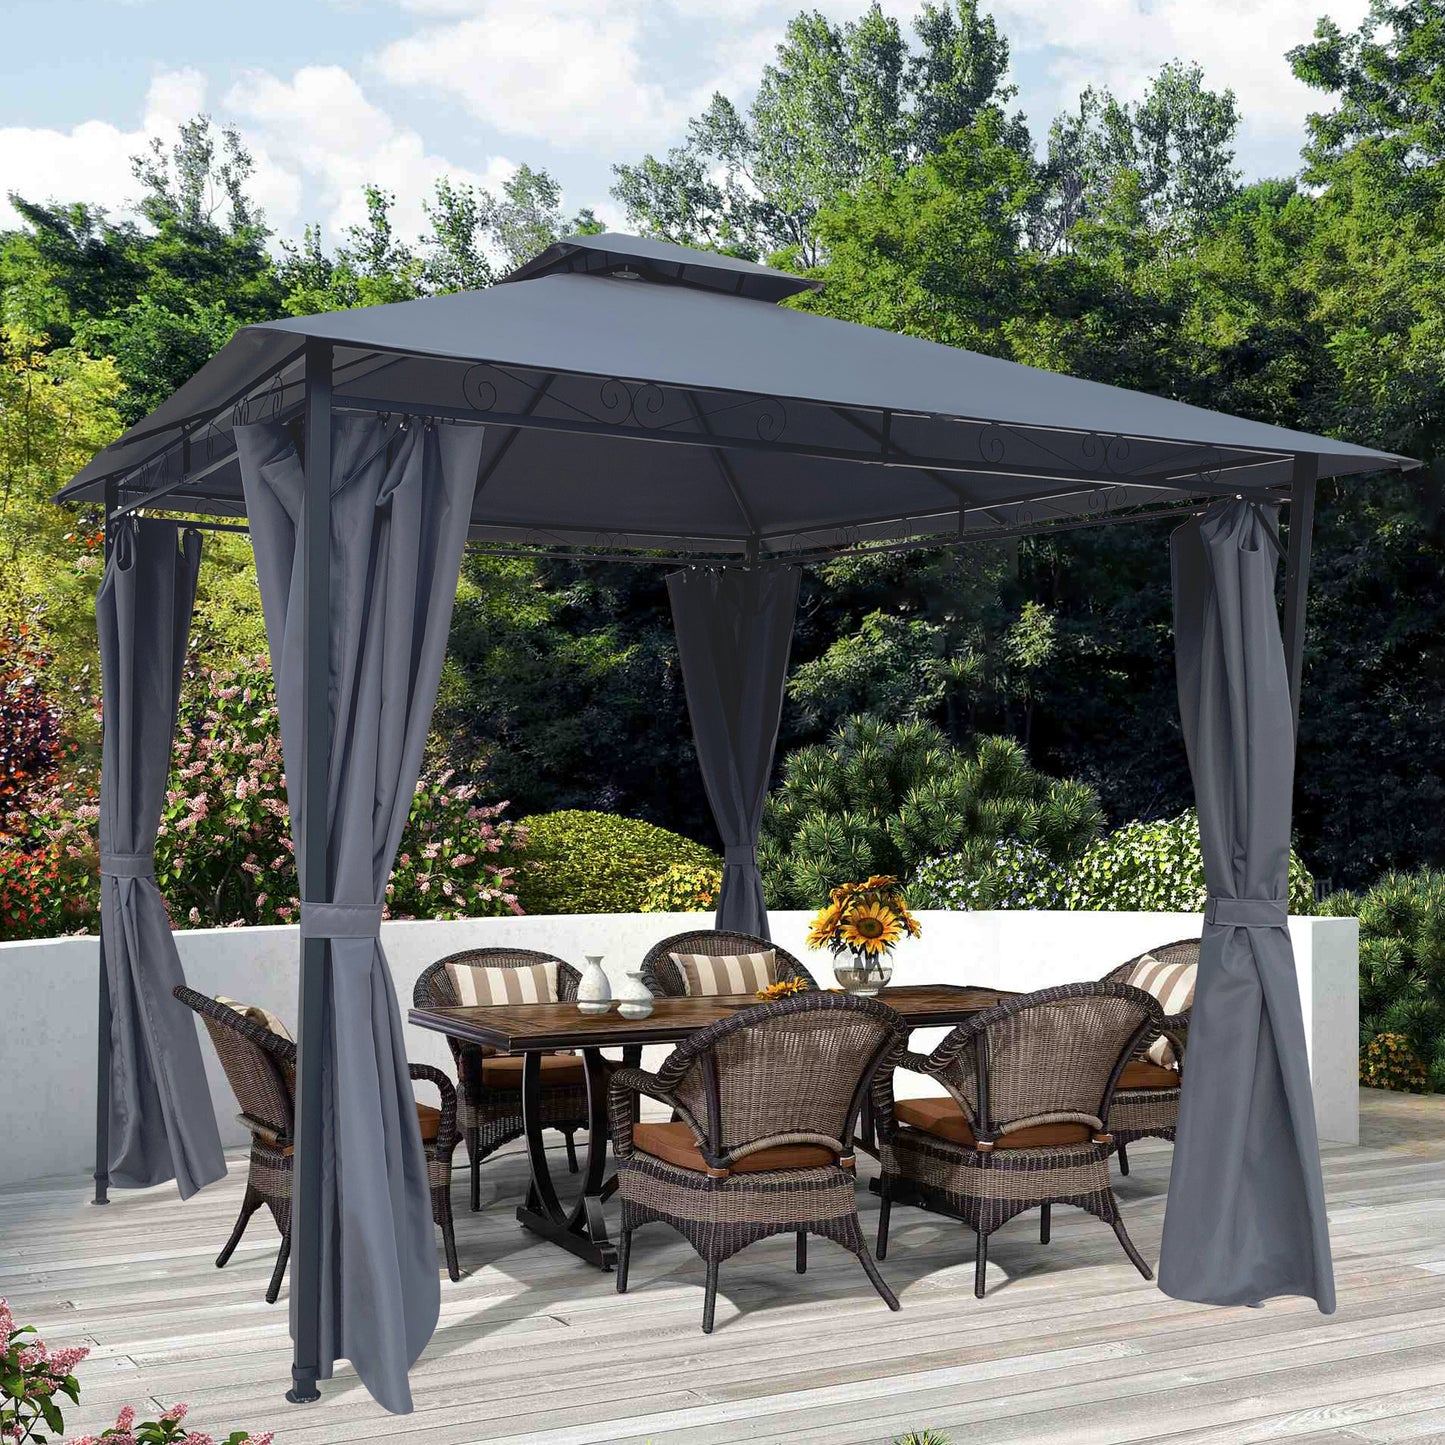 10x10 Ft Outdoor Patio Garden Gazebo Tent, Outdoor Shading, Gazebo Canopy With Curtains, Gray